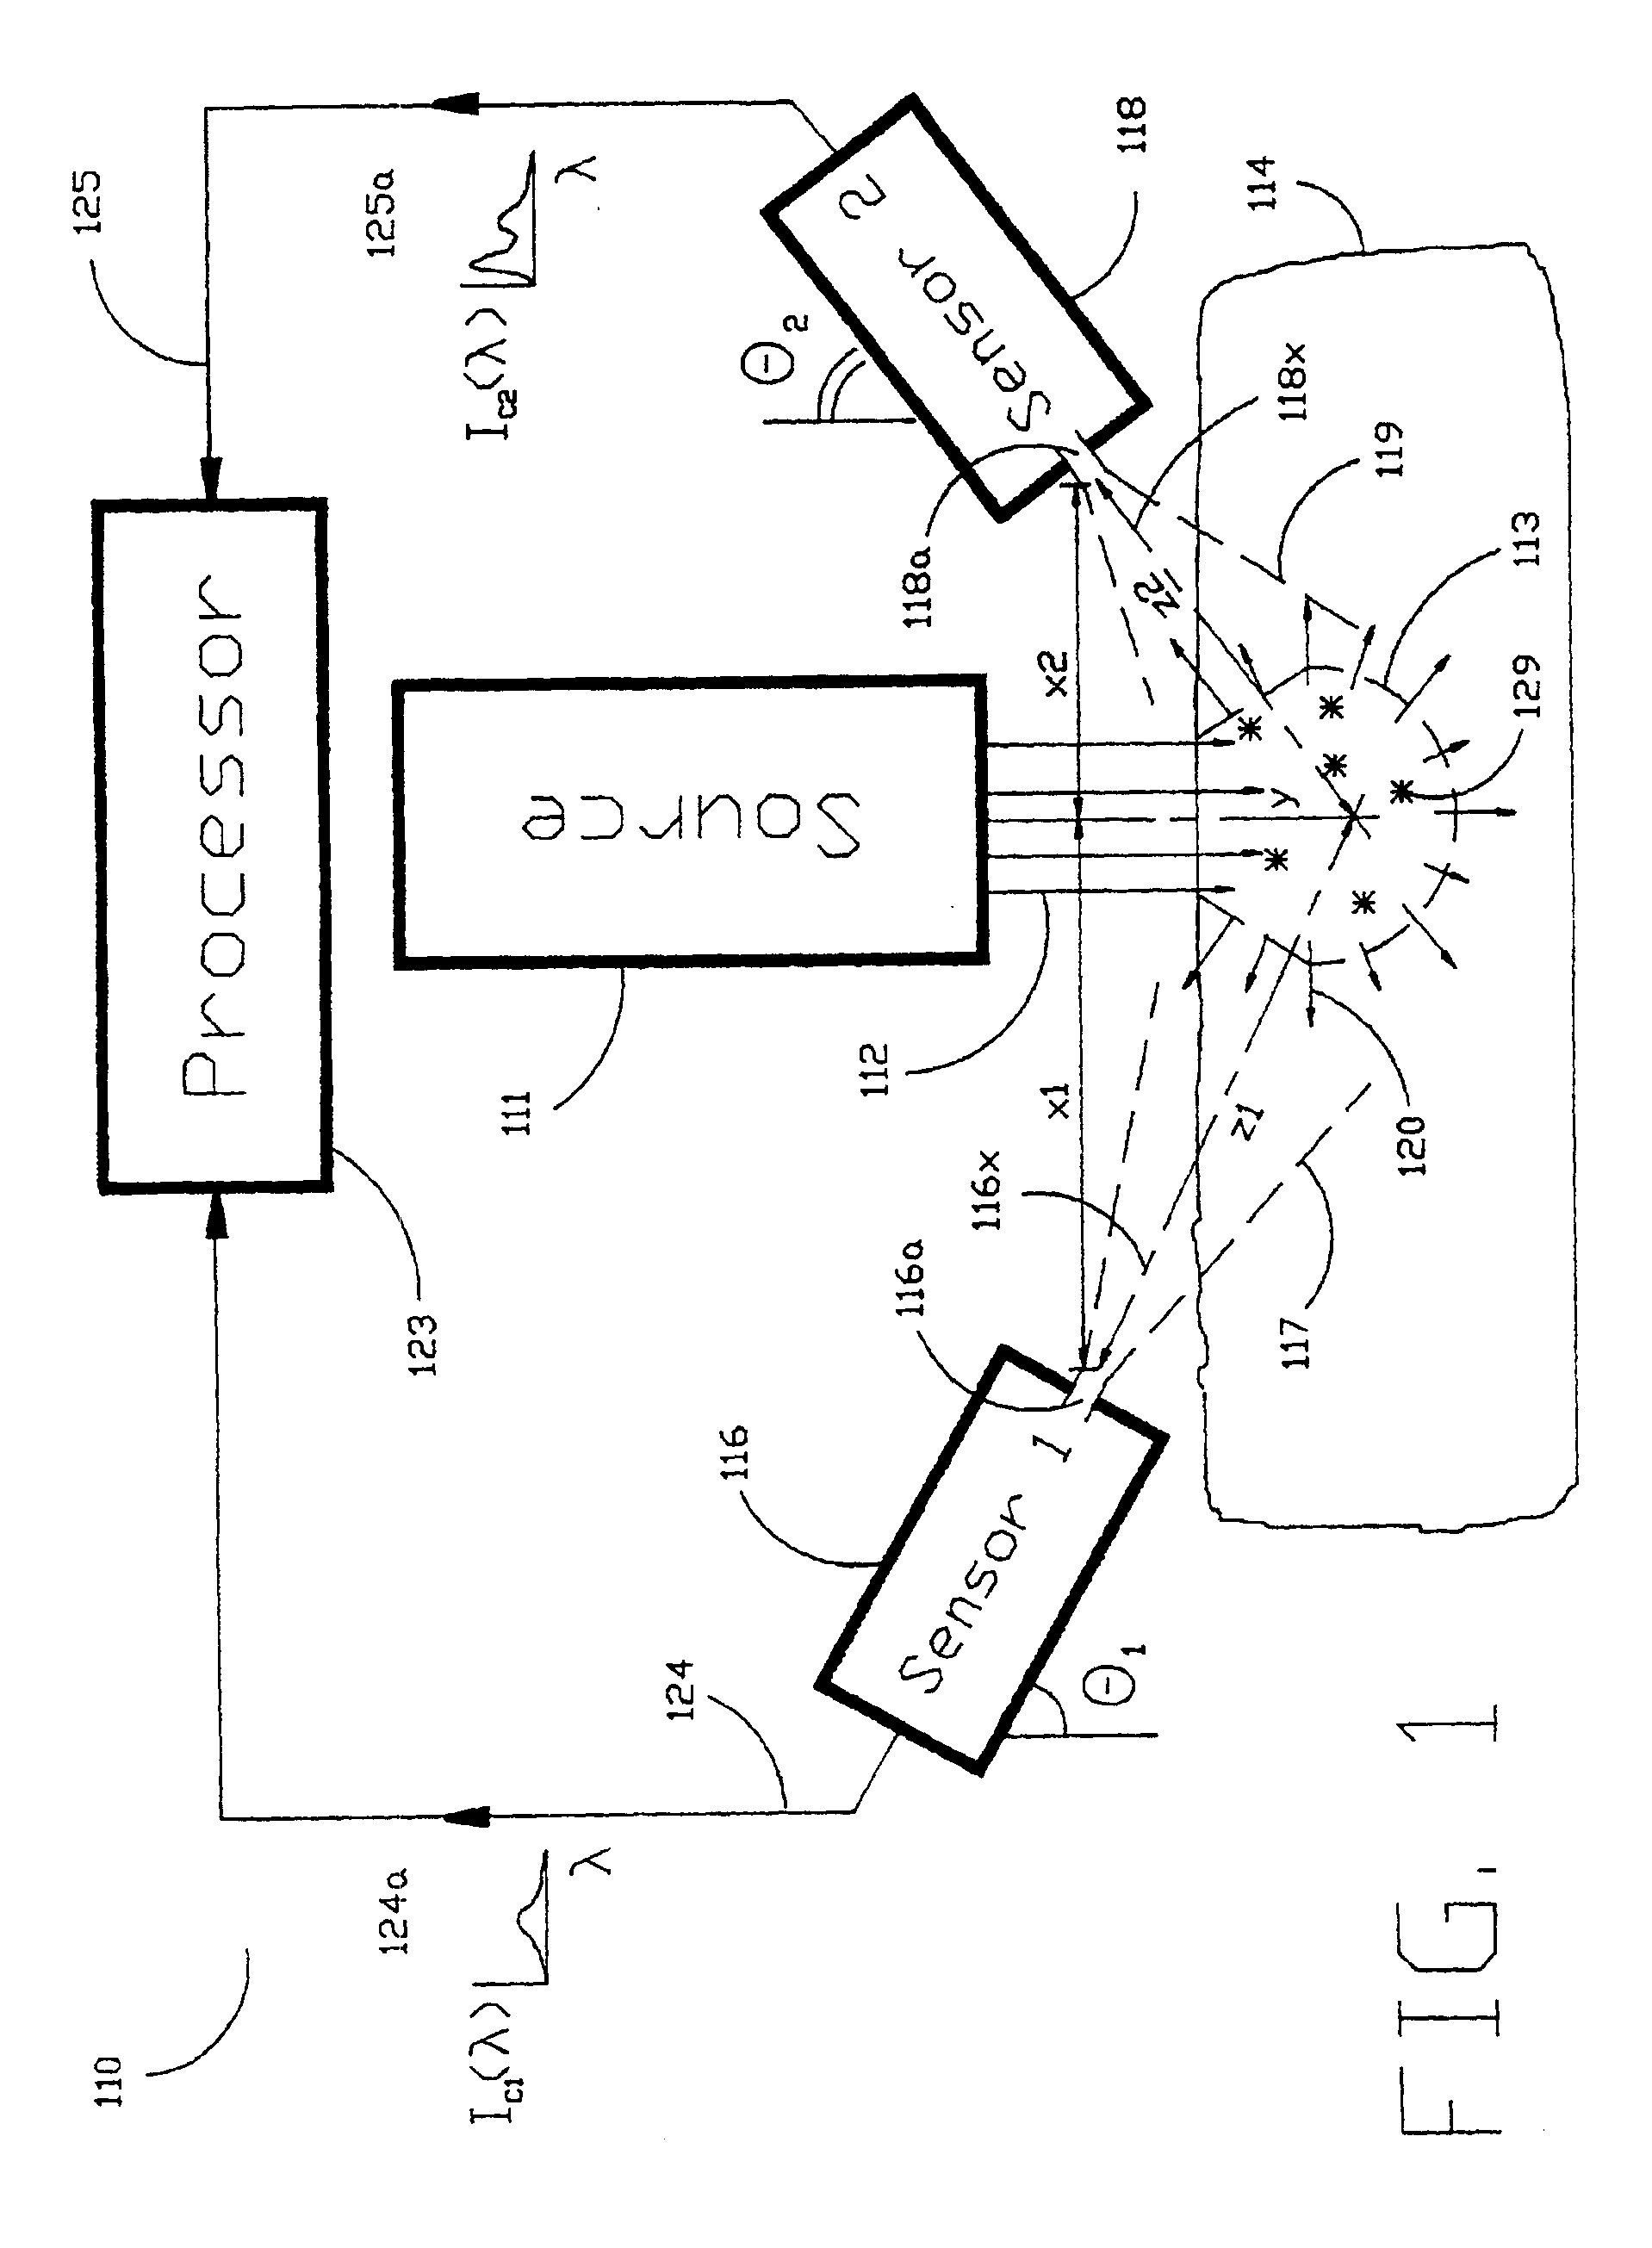 Method and devices for laser induced fluorescence attenuation spectroscopy